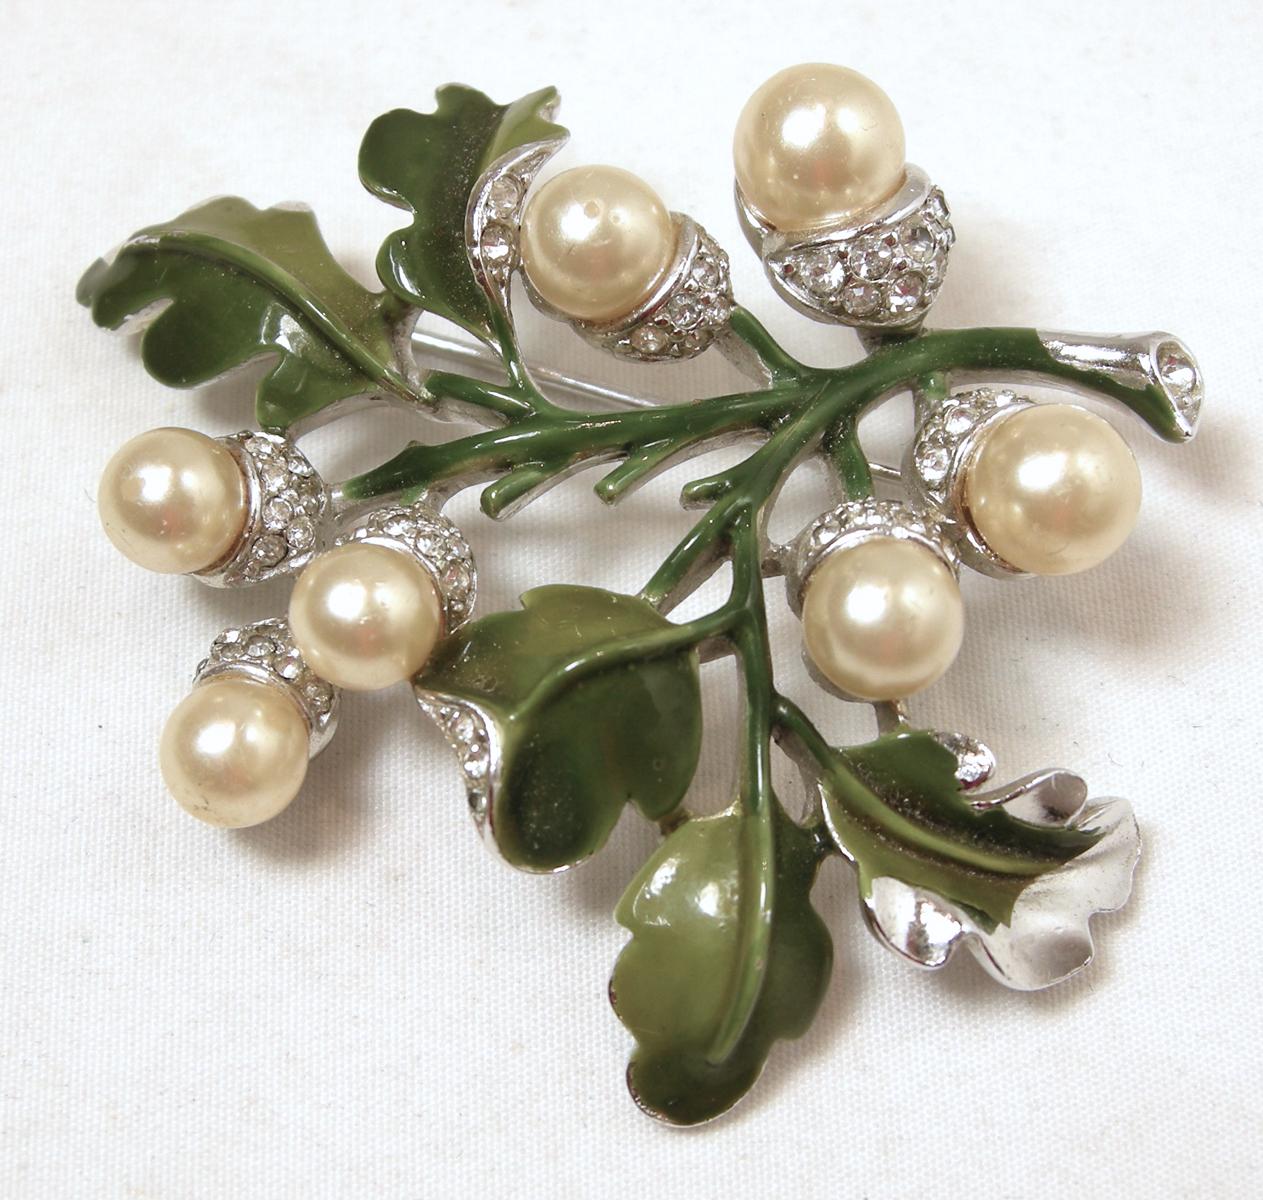 This vintage Trifari brooch has a floral design with faux pearls, clear crystals and green enamel leaves on a rhodium silver tone setting.  In excellent condition, this brooch measures 2-1/4” x 2”.